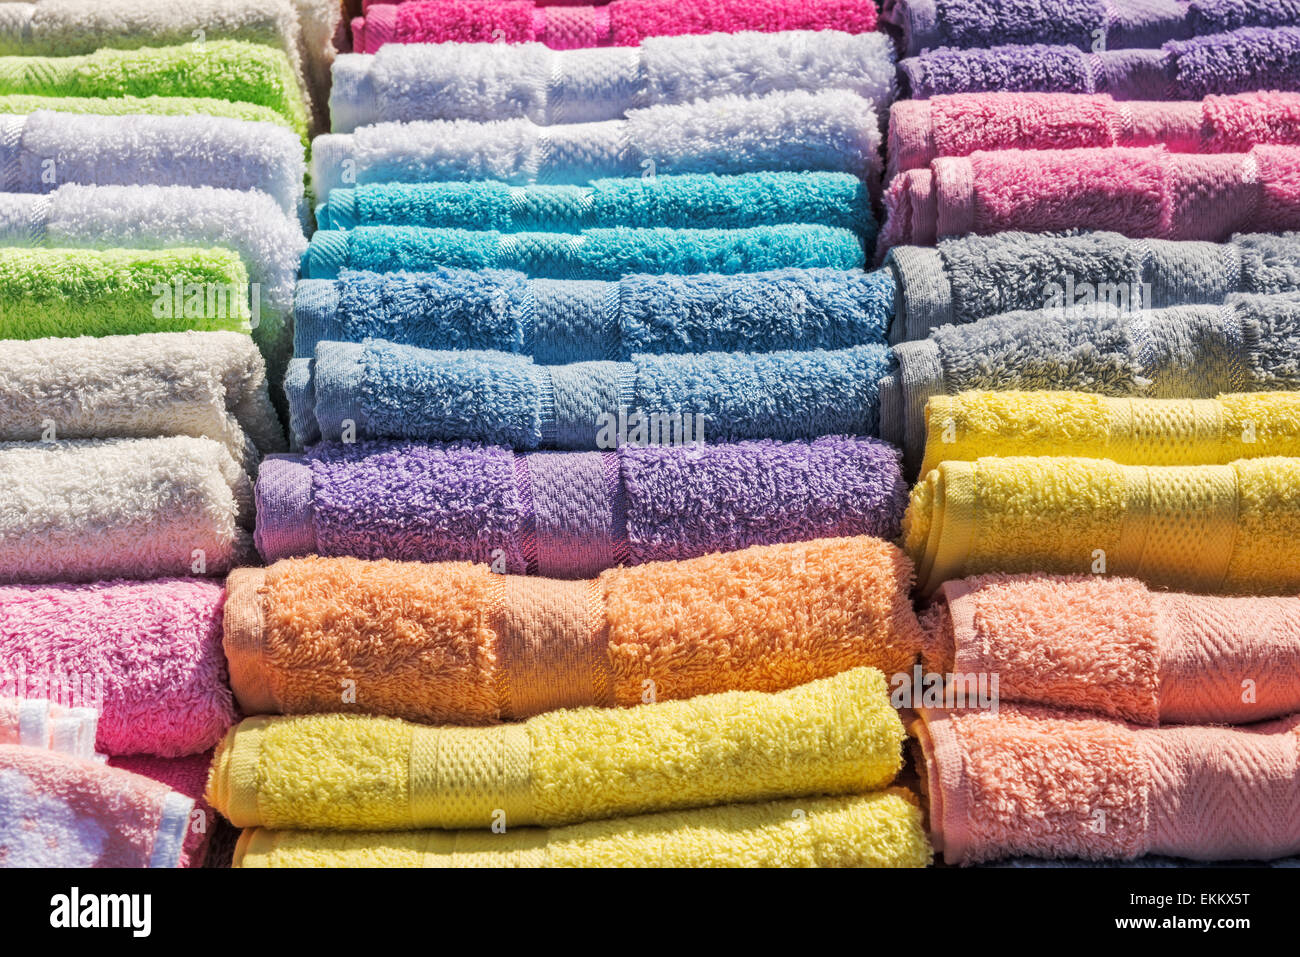 Colorful bath towels stacked on rows in market Stock Photo